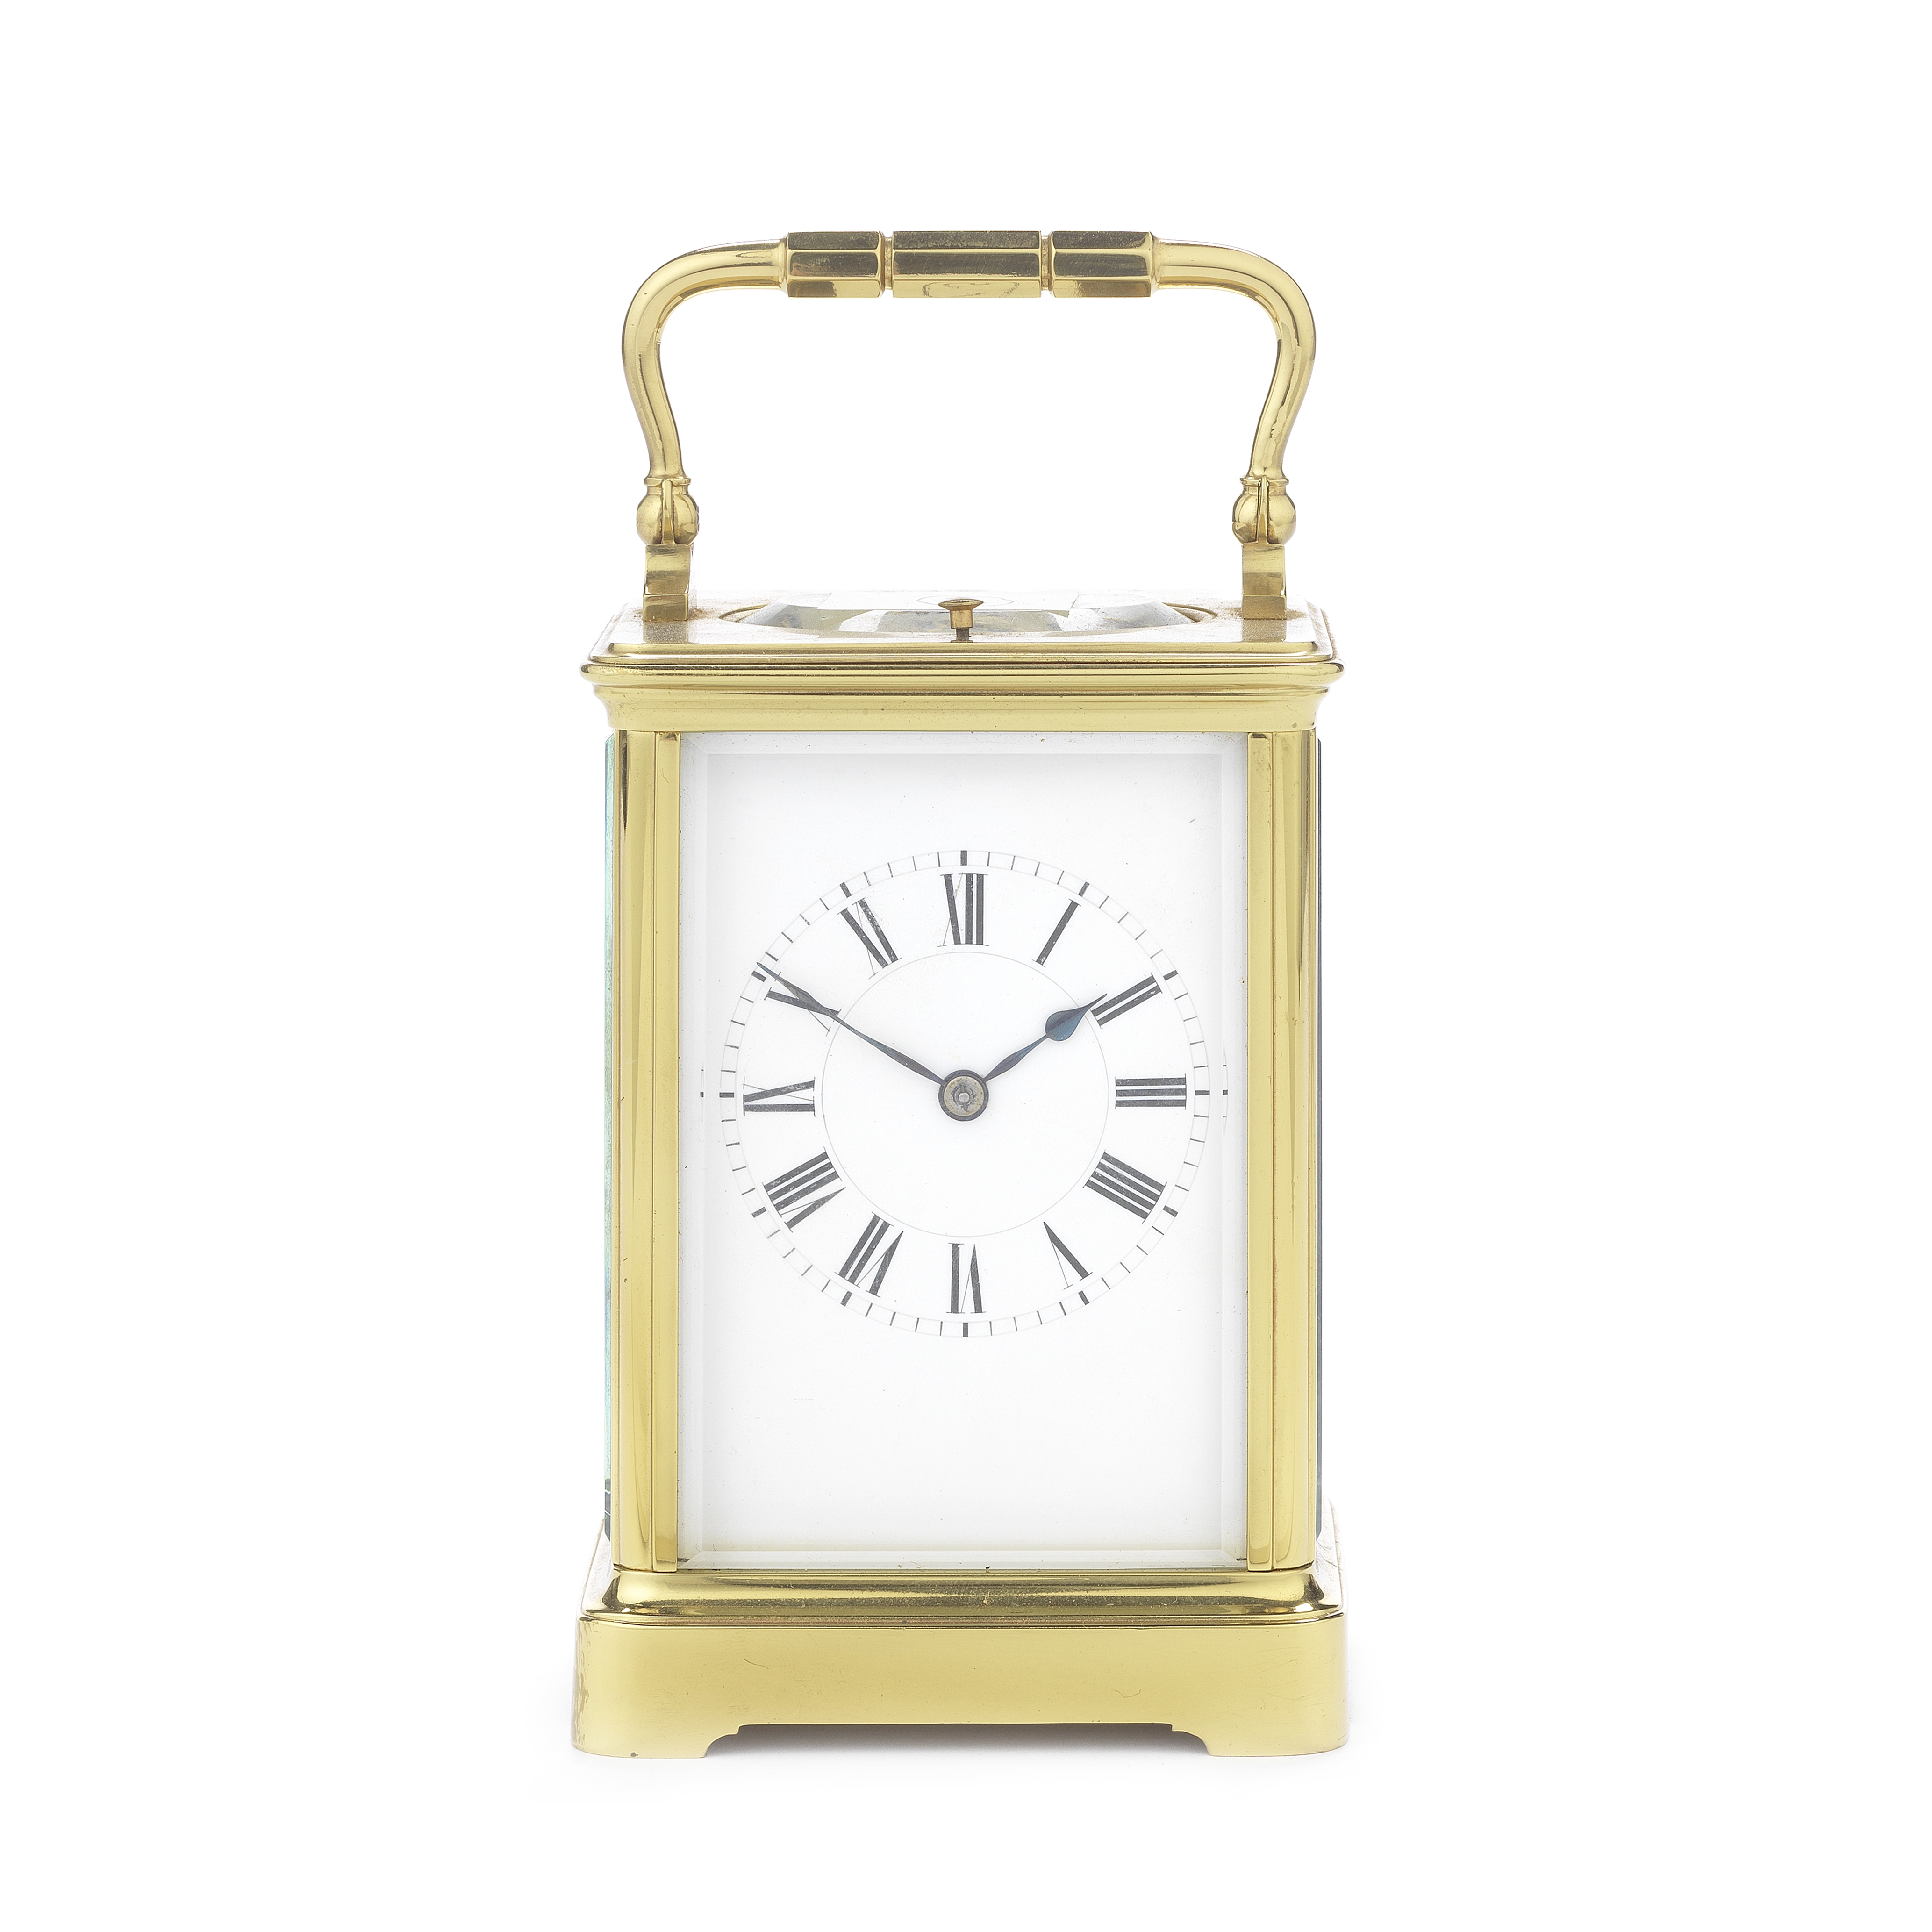 An early 20th century French brass carriage clock with repeat the movement stamped for Henri Jacot